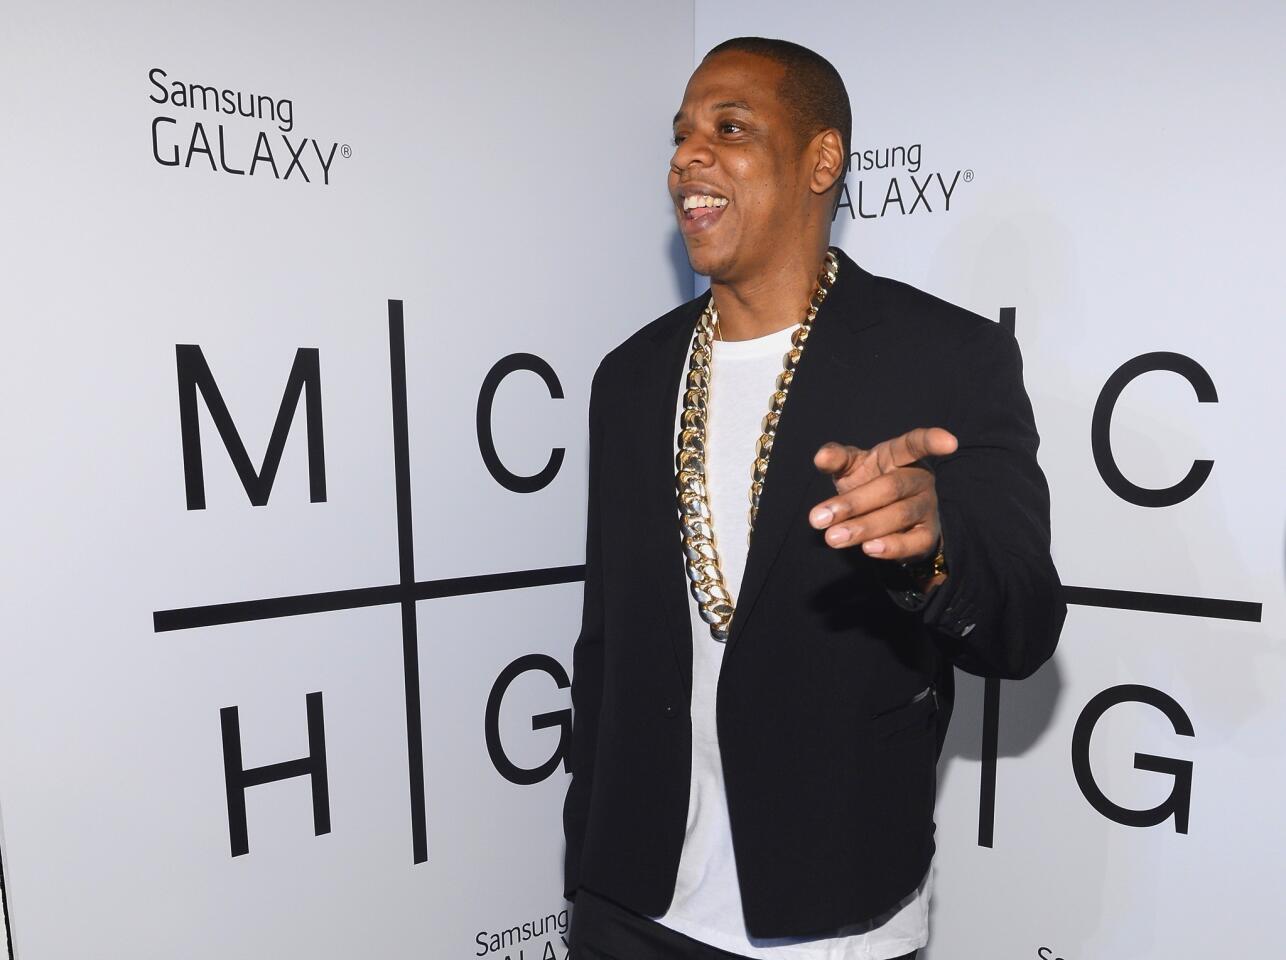 Rapper/businessman/new dad Jay-Z released his 12th solo studio album Wednesday . Produced by Timbaland, "Magna Carta Holy Grail" features cameos from Frank Ocean and Justin Timberlake, Biggie Smalls' grunt and quotes from Nirvana. Times Pop Music critic wrote that while the "sonically stunning" album certainly shimmers, "a true masterpiece harnesses intellect and adventure to push forward not only musically but also thematically."